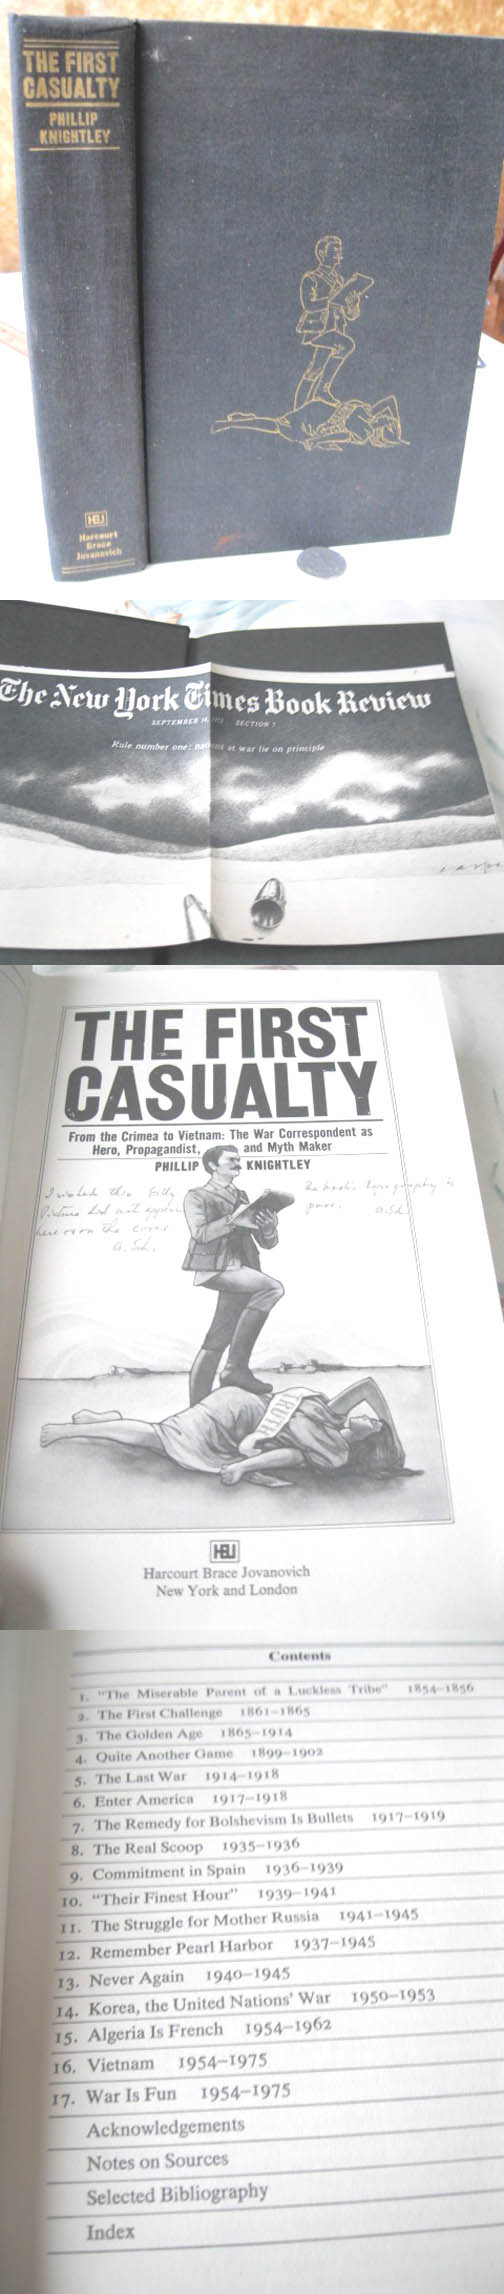 the first casualty phillip knightley